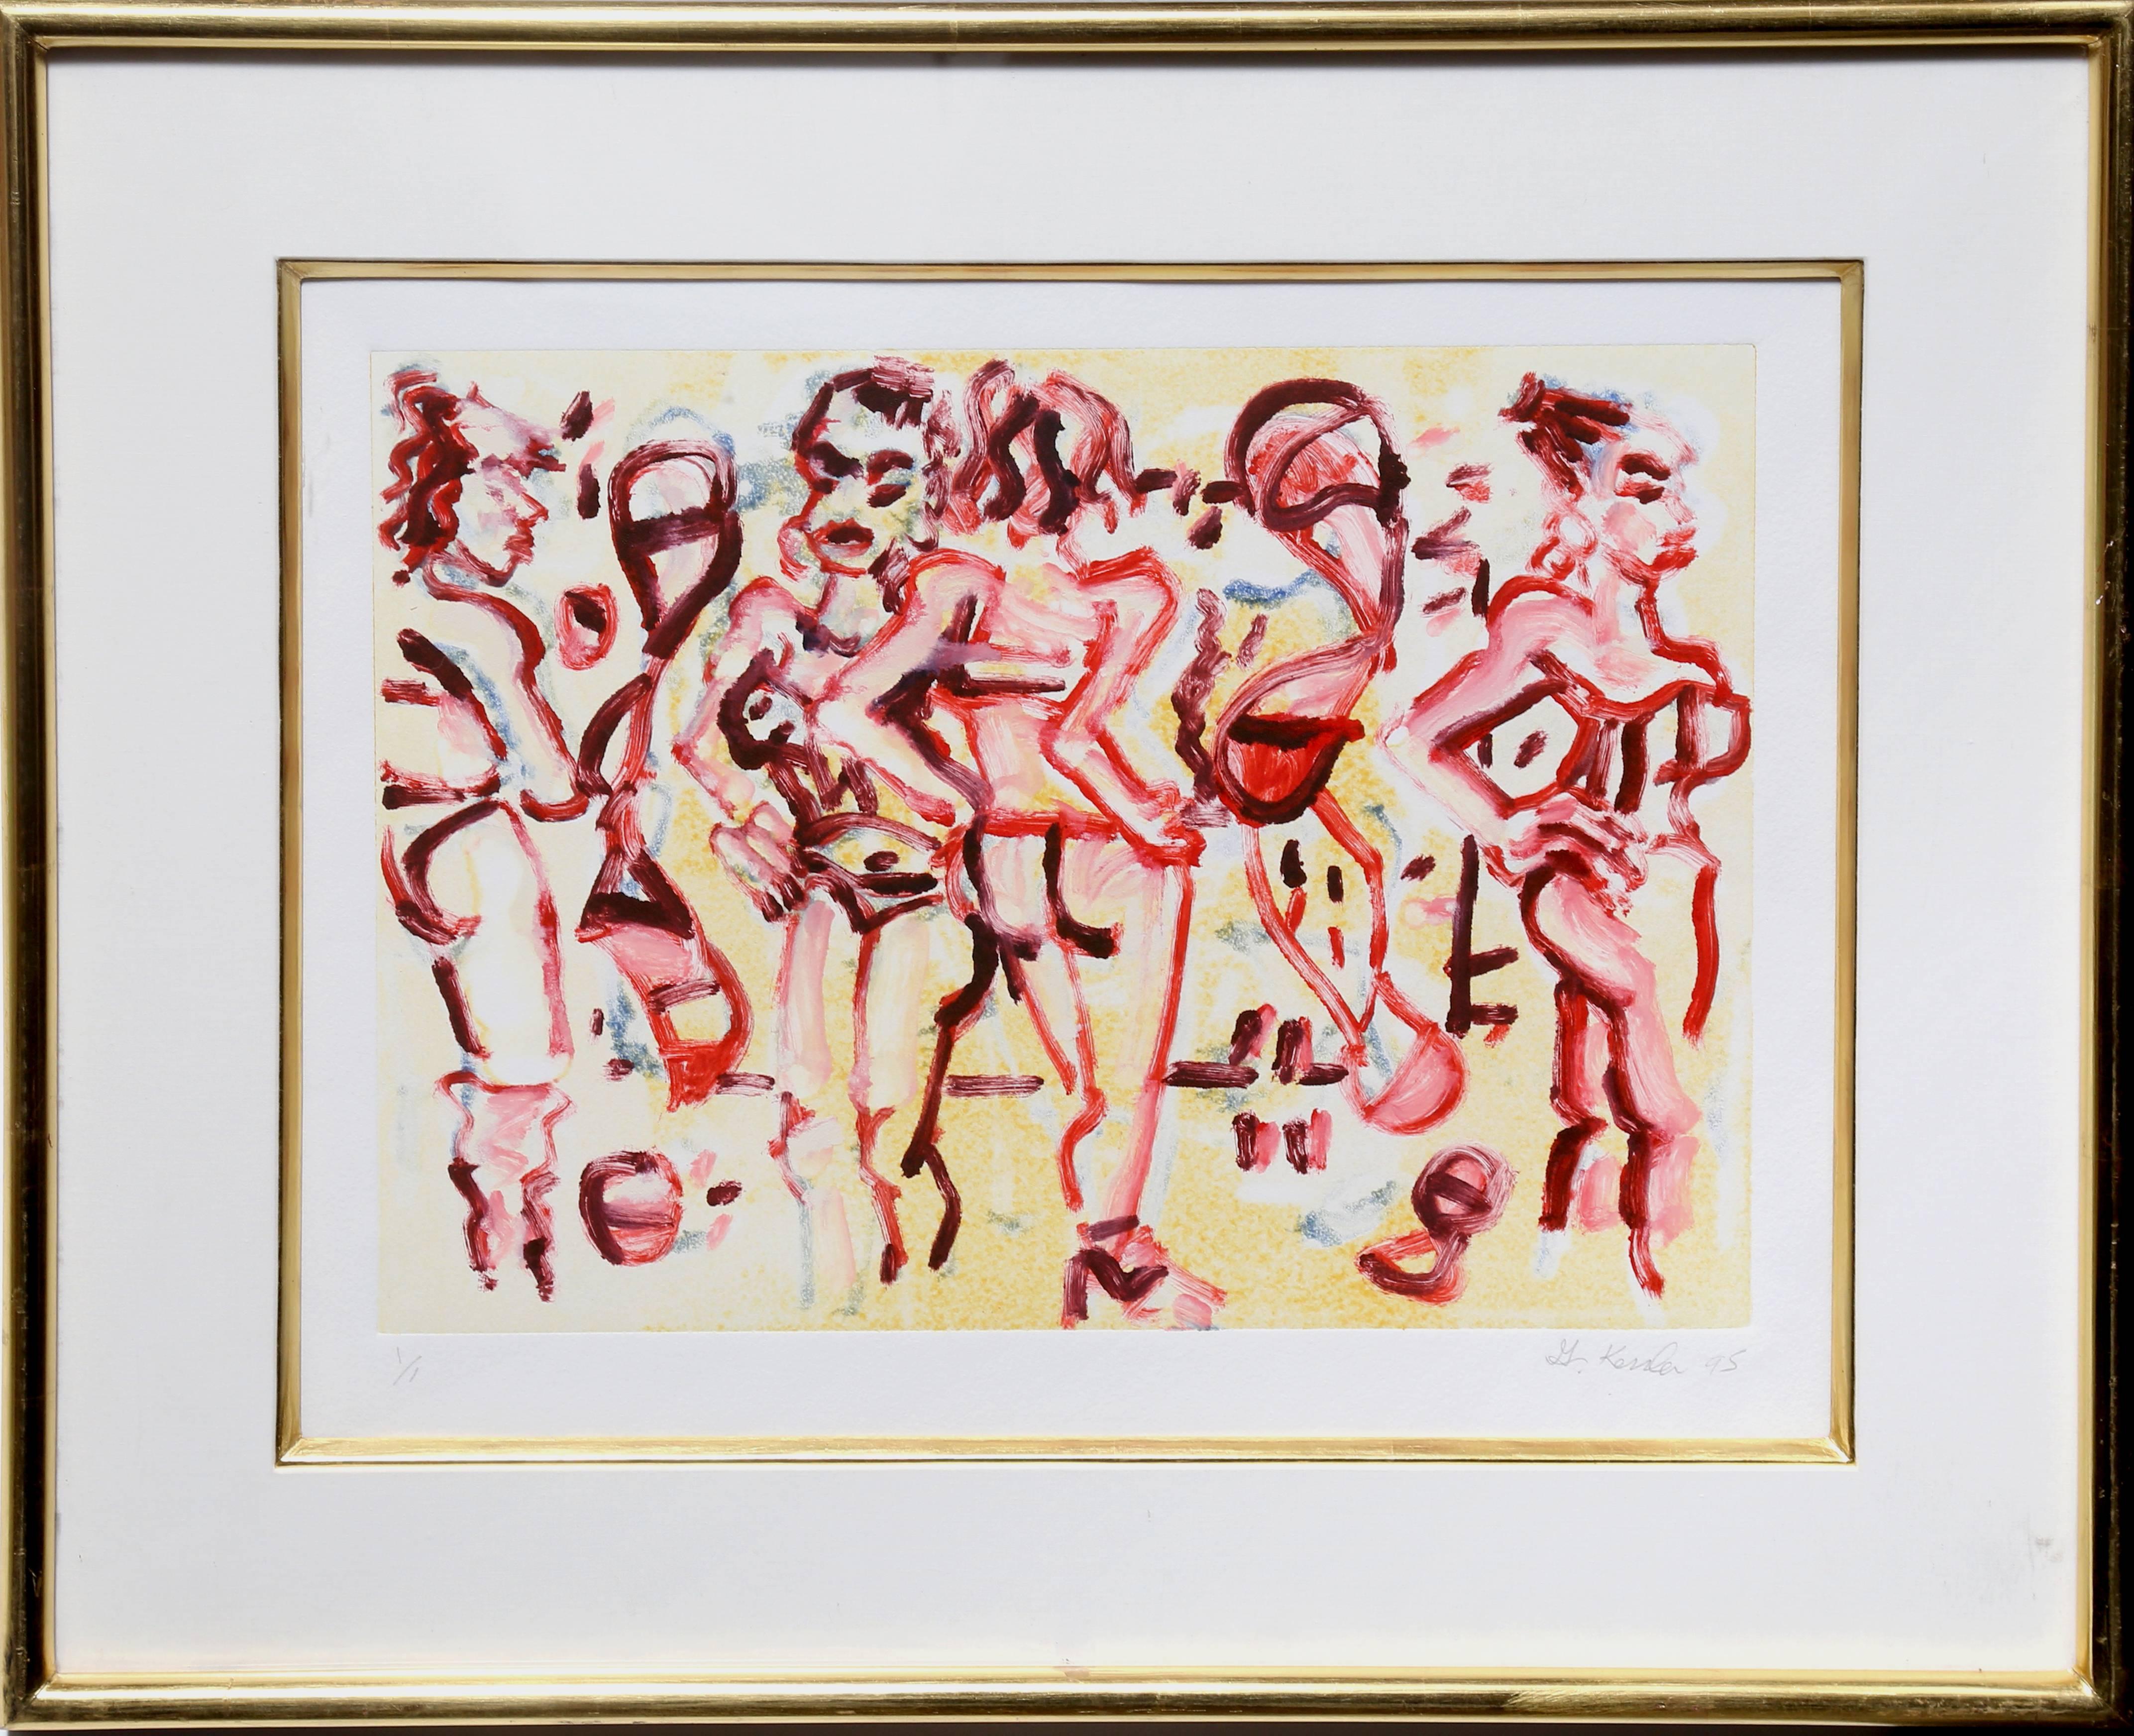 Artist: Greg Kessler, American (1966 - )
Title: Women in Heels
Year: 1995
Medium: Monotype Etching with Aquatint, signed in pencil
Edition: 1/1
Size: 12 x 16 in. (30.48 x 40.64 cm)
Frame Size: 20.5 x 24.5 inches